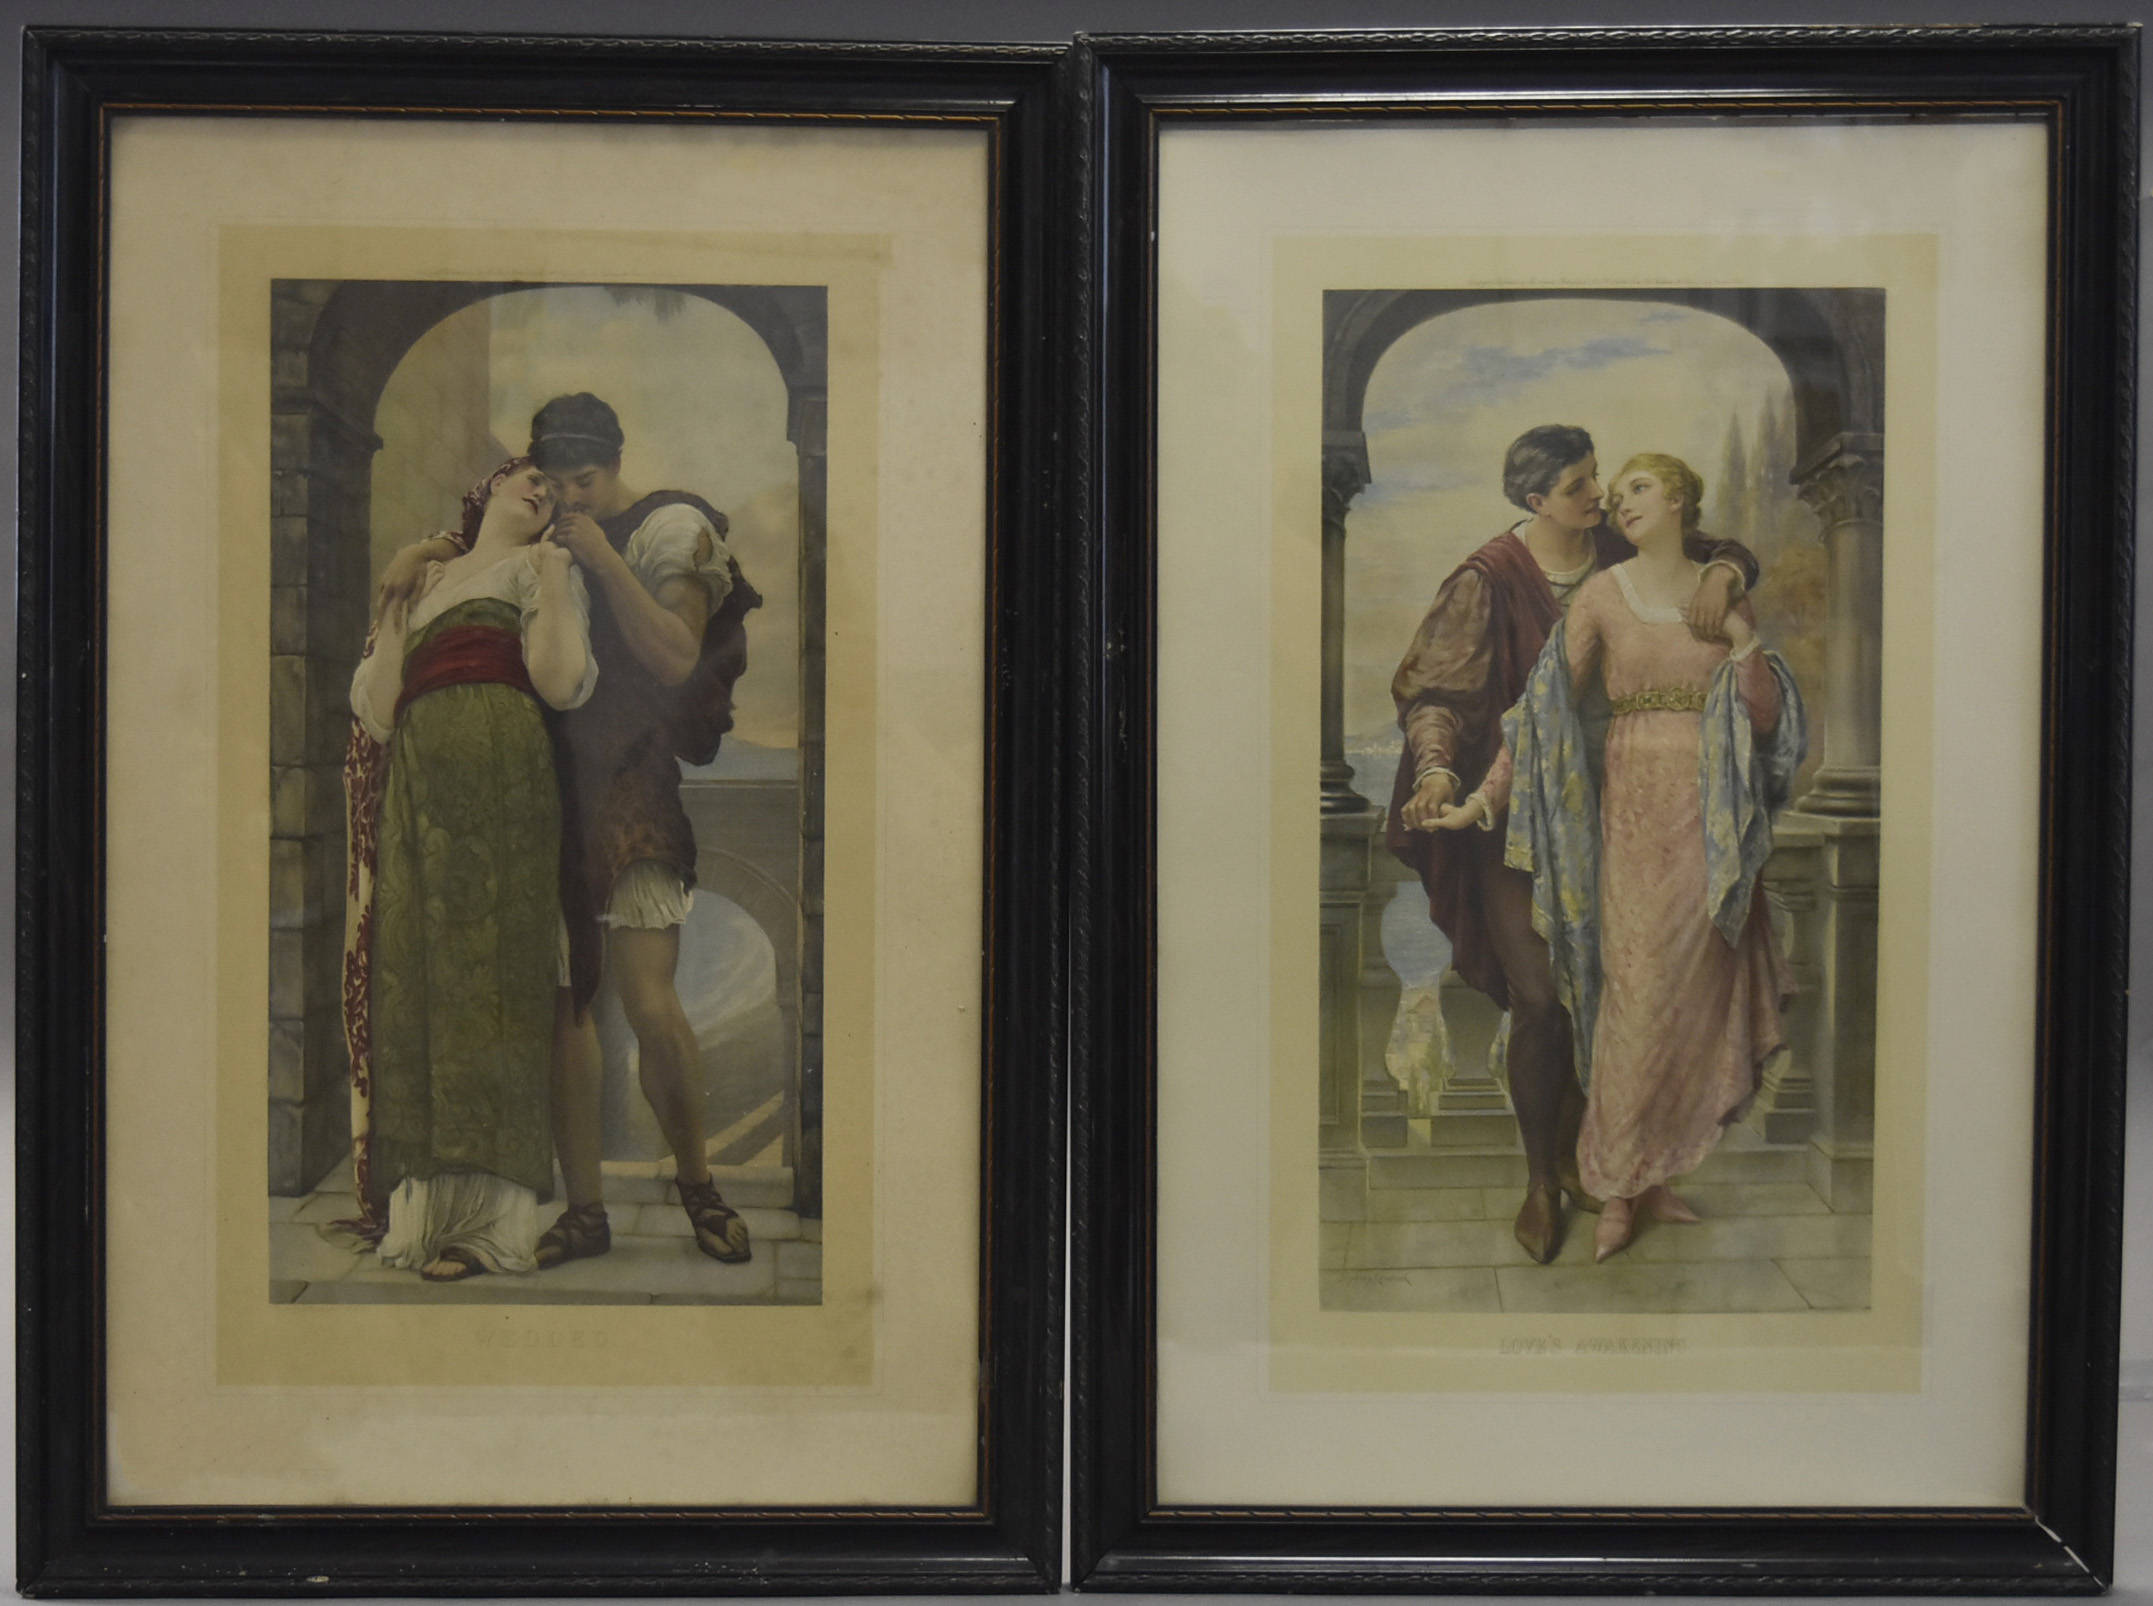 Early 20th Century pair of coloured lithographs after Frederick Lord Leighton (1830-1896) and Sydney